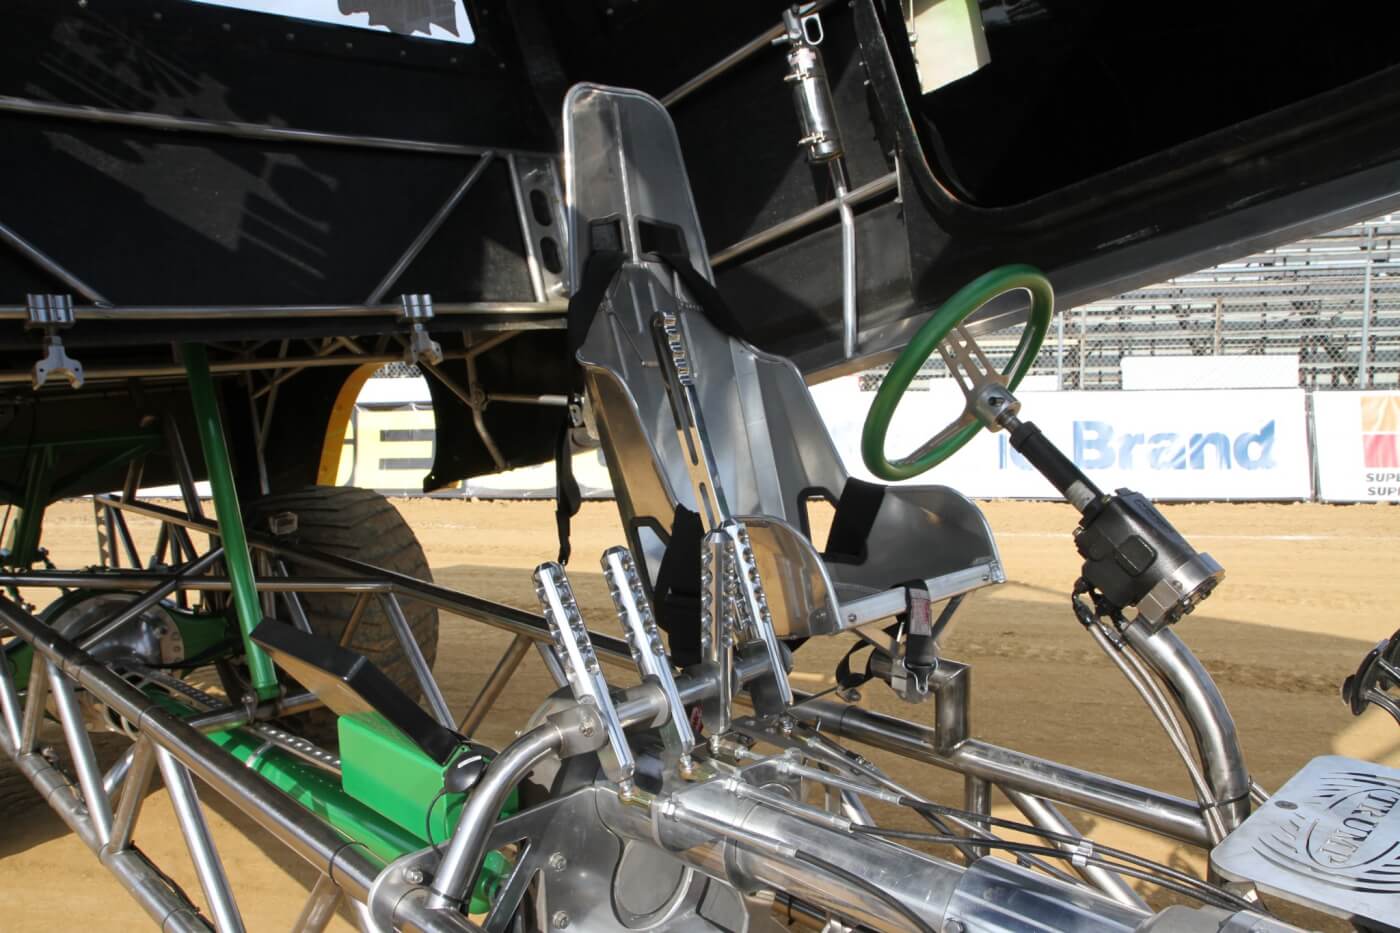 Kellogg’s control center allows him to focus on dragging the sled down the track with minimal distractions. Belted into the aluminum seat, he can easily reach the billet aluminum hand throttle, as well as the gear shift, fuel kill, emergency fuel shut off and emergency air shut off leavers as needed.